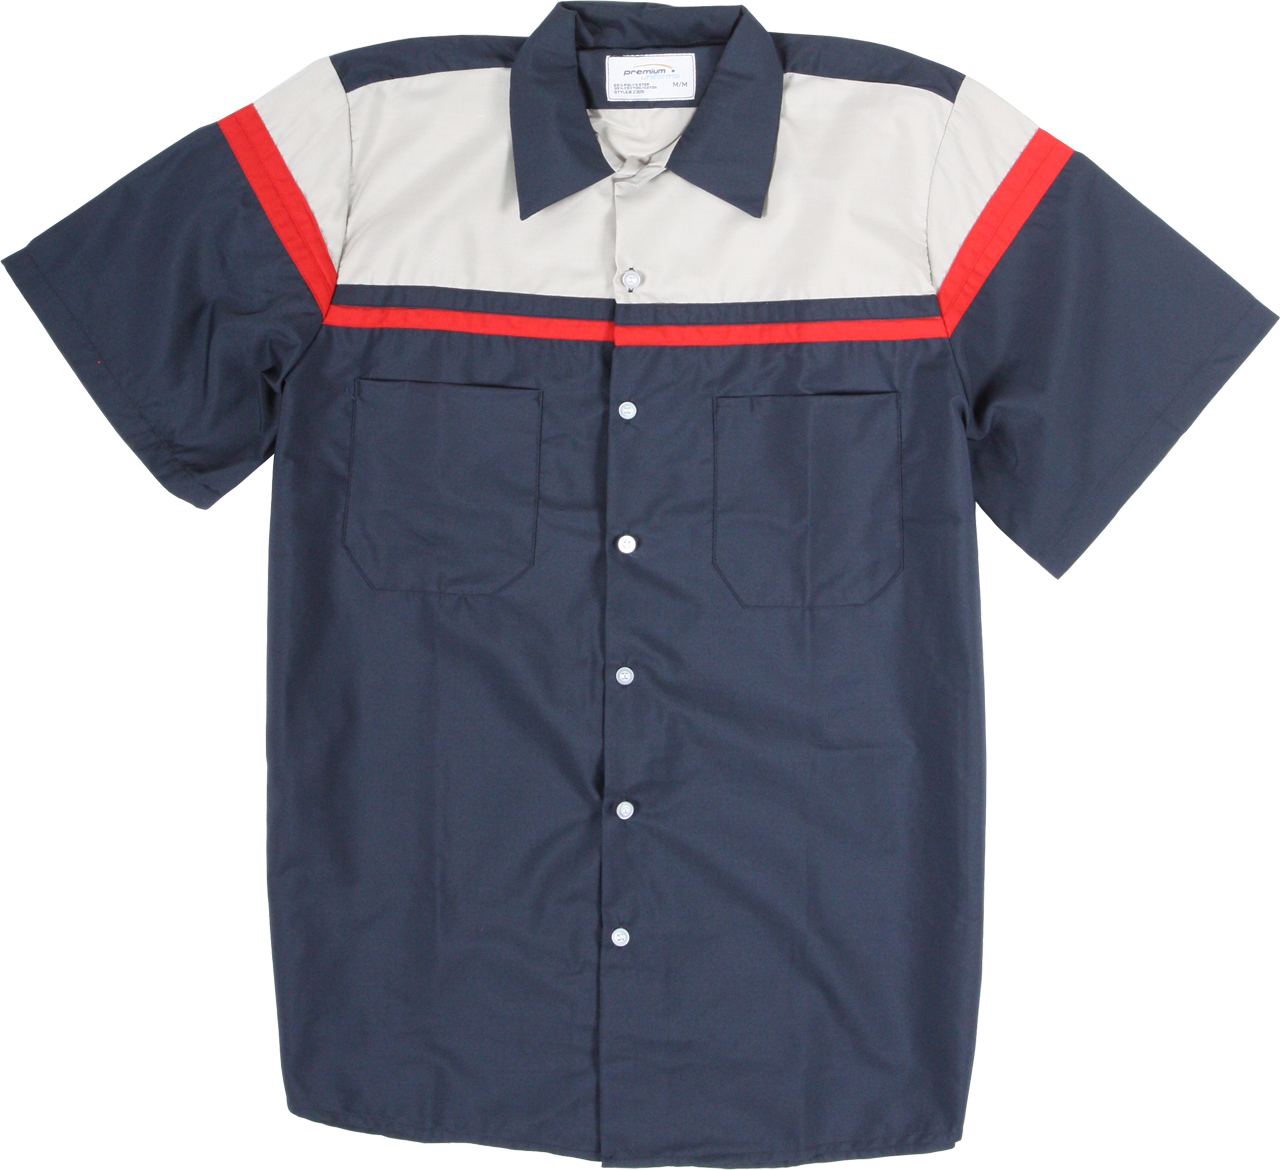 Picture of Premium Uniforms Short Sleeve Two-Toned Striped Work Shirt